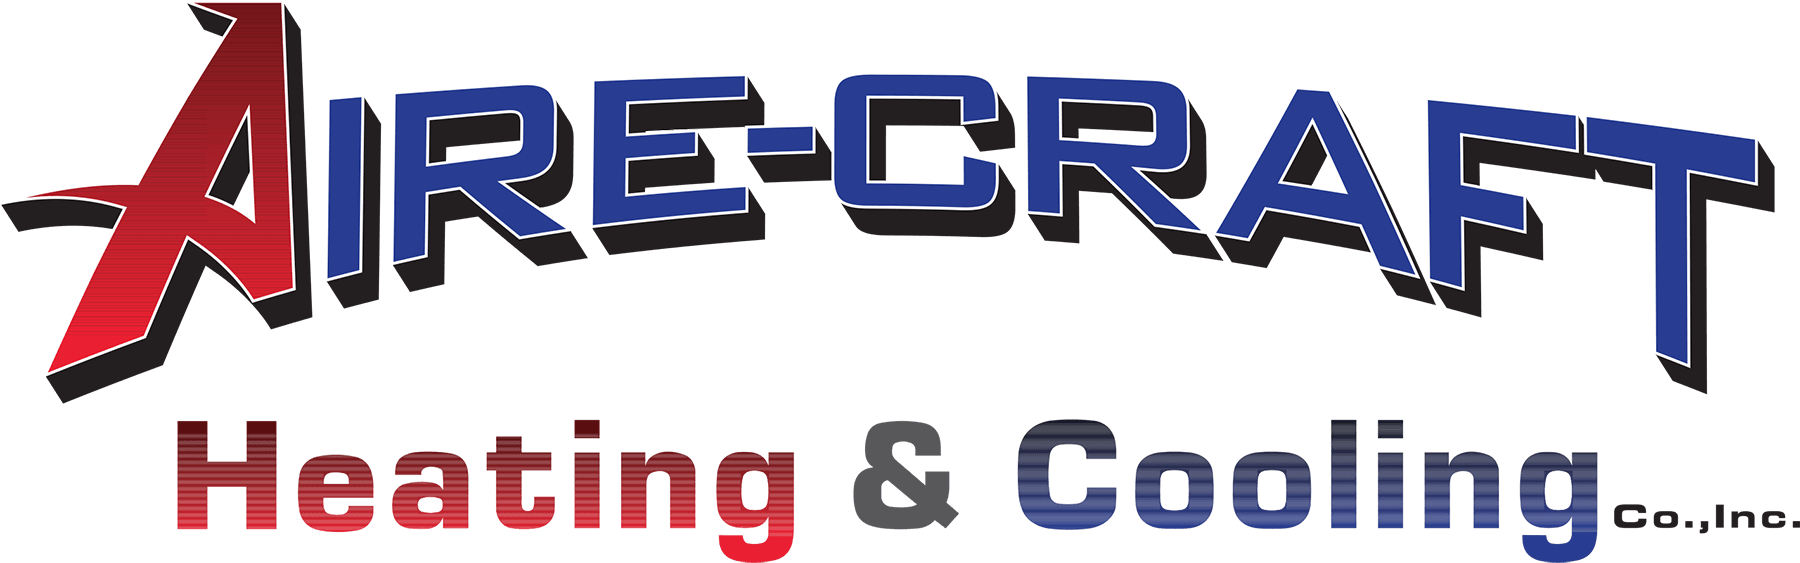 Aire-Craft Heating & Cooling Co Inc - Logo